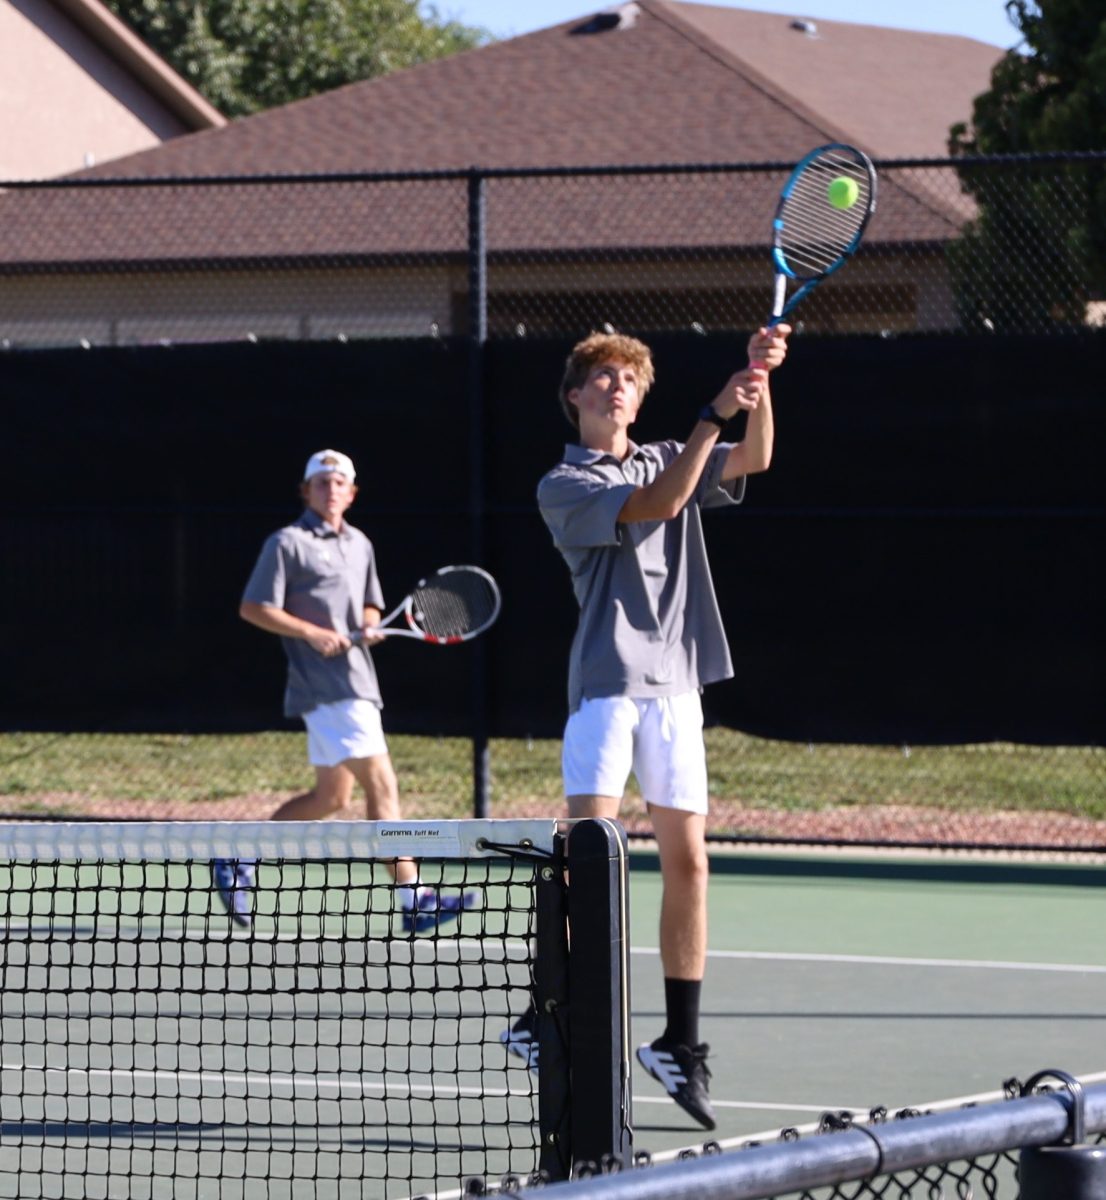 Cousins+Jamison+and+Isaac+Boyer+team+up+as+the+No.+1+doubles+team+for+GJHS+boys+tennis.+The+seniors+are+among+10+Tigers+who+qualified+for+the+Class+4A+state+tournament.